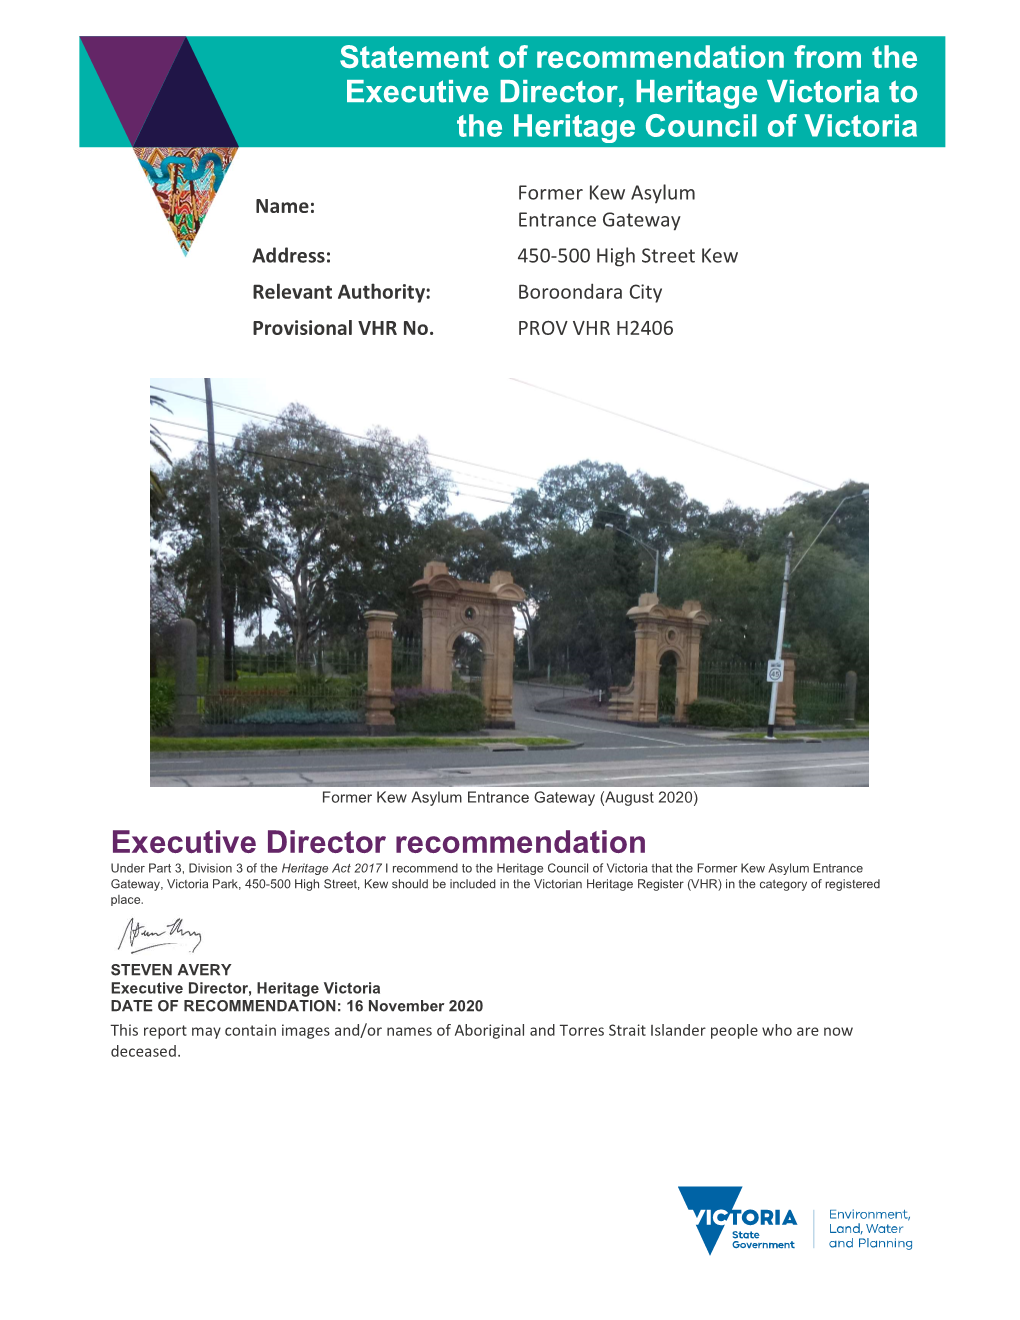 Executive Director Recommendation Statement of Recommendation From